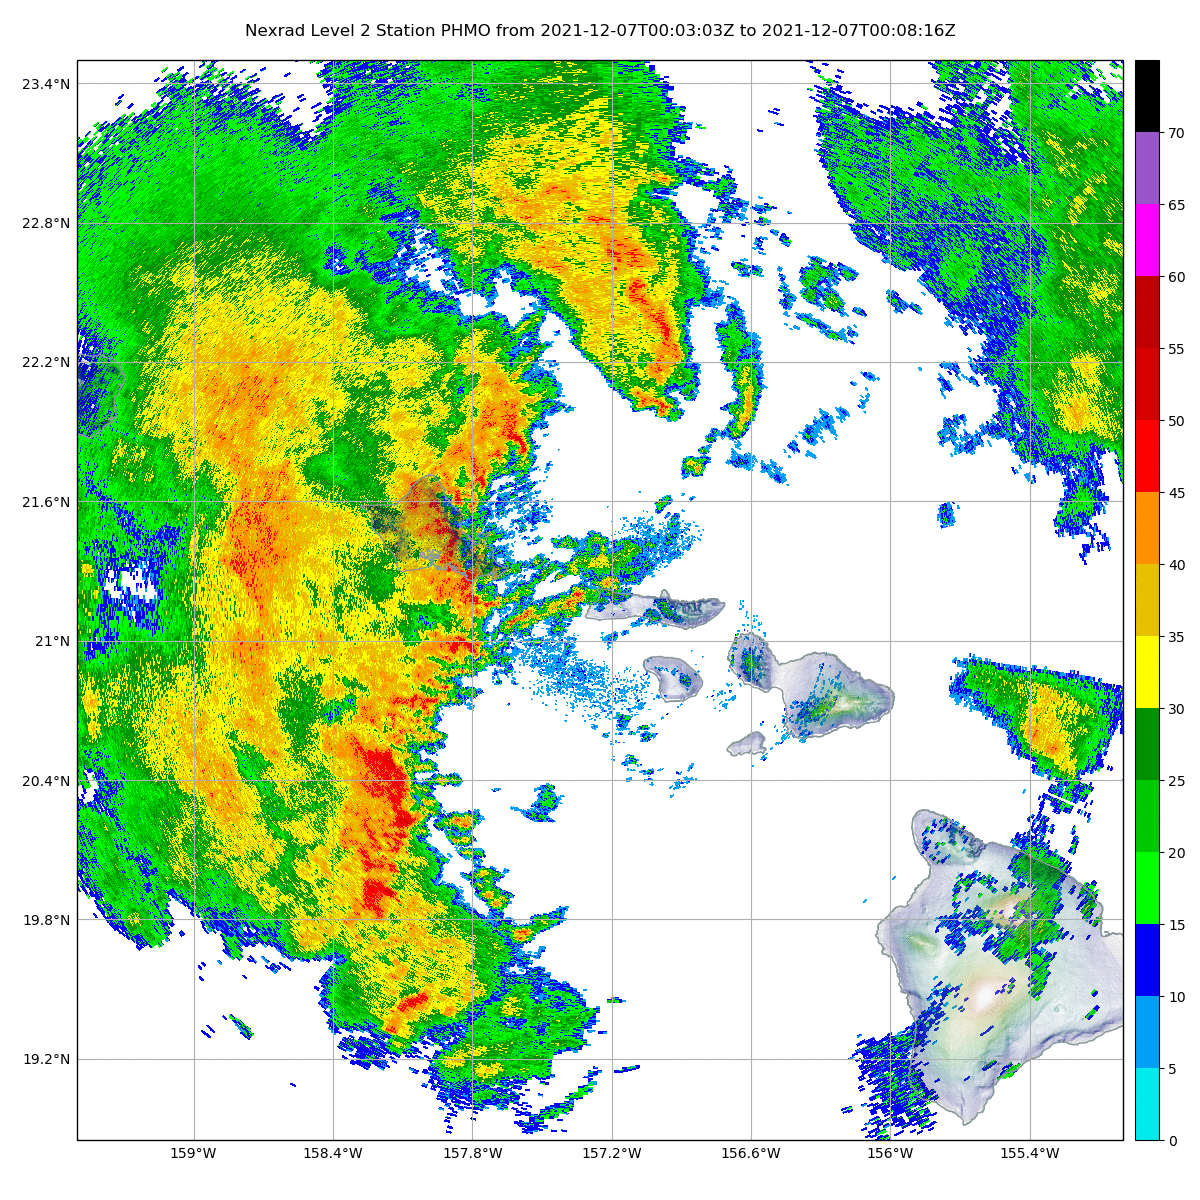 Image loop of radar composite reflectivity from the Kauaʻi and Molokai radars on December 6 from 2:00 PM HST to 4:00 PM HST